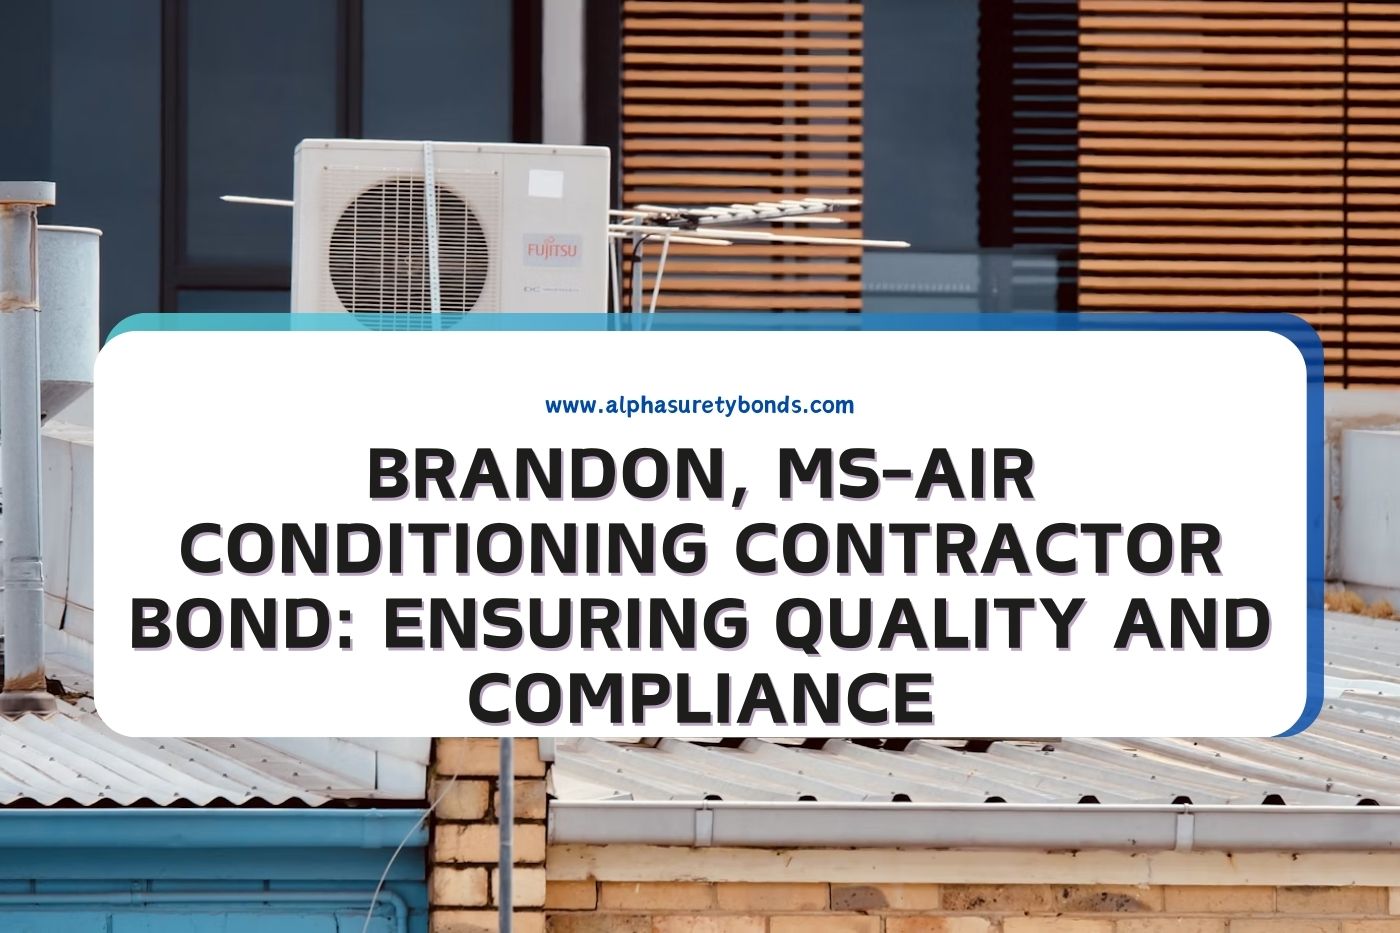 Brandon, MS-Air Conditioning Contractor Bond: Ensuring Quality and Compliance